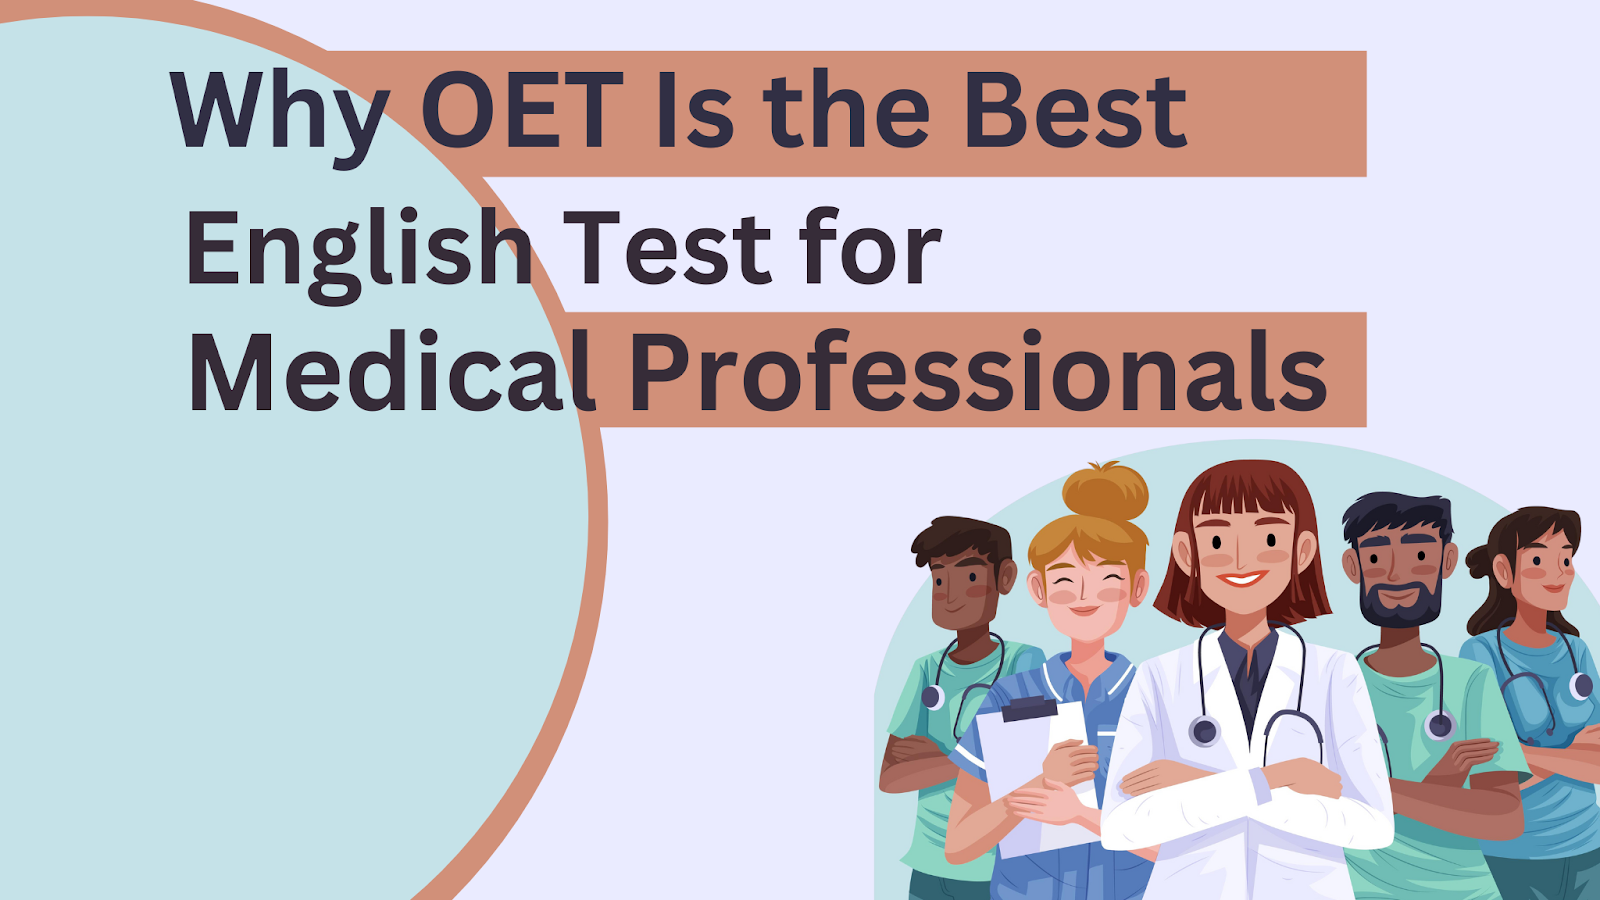 5 Reasons Why the OET Is the Best English Test for Medical Professionals